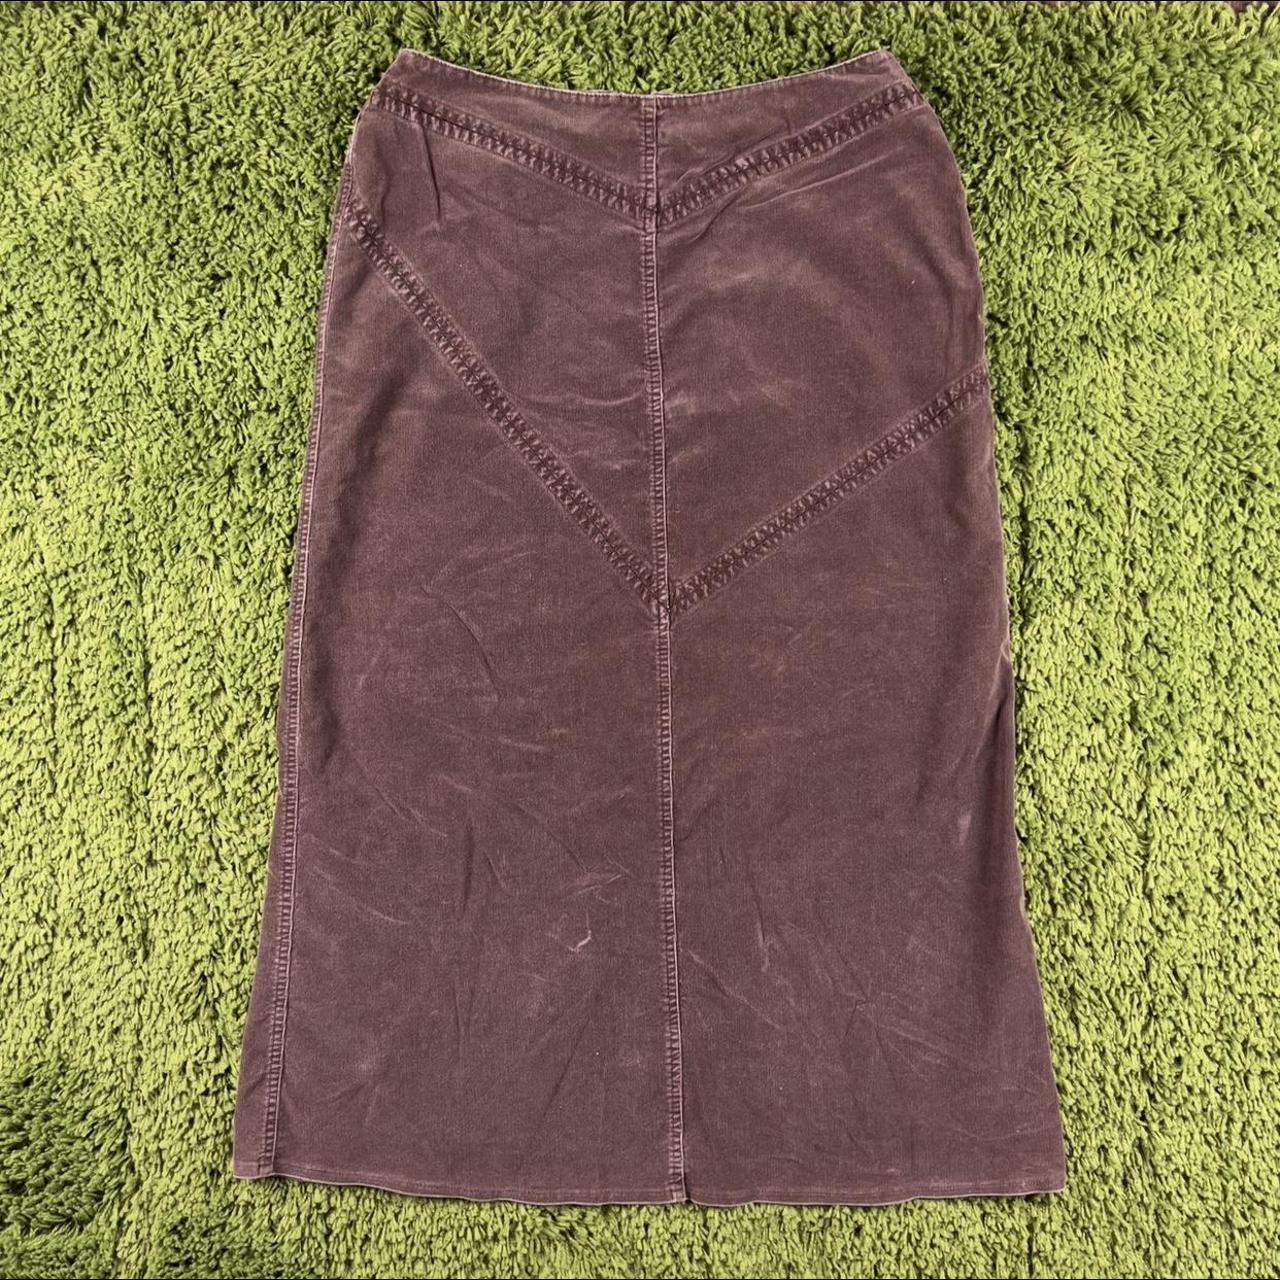 The Bean skirt Brown corduroy skirt with stitched... - Depop